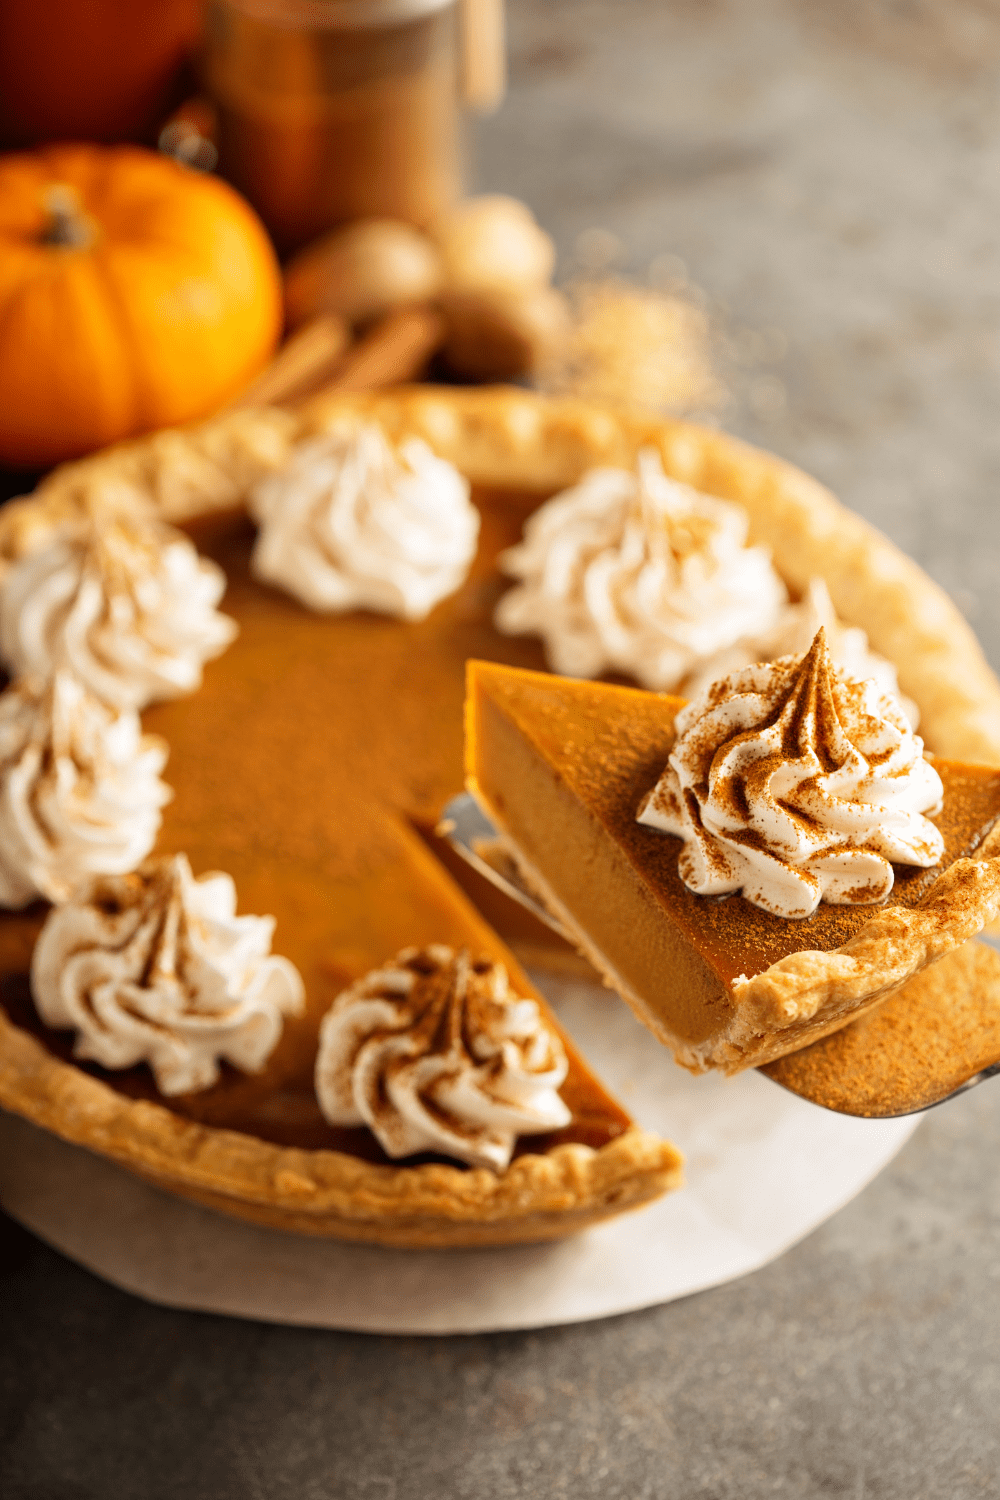 Pumpkin Pie With Whipped Cream And Cinnamon